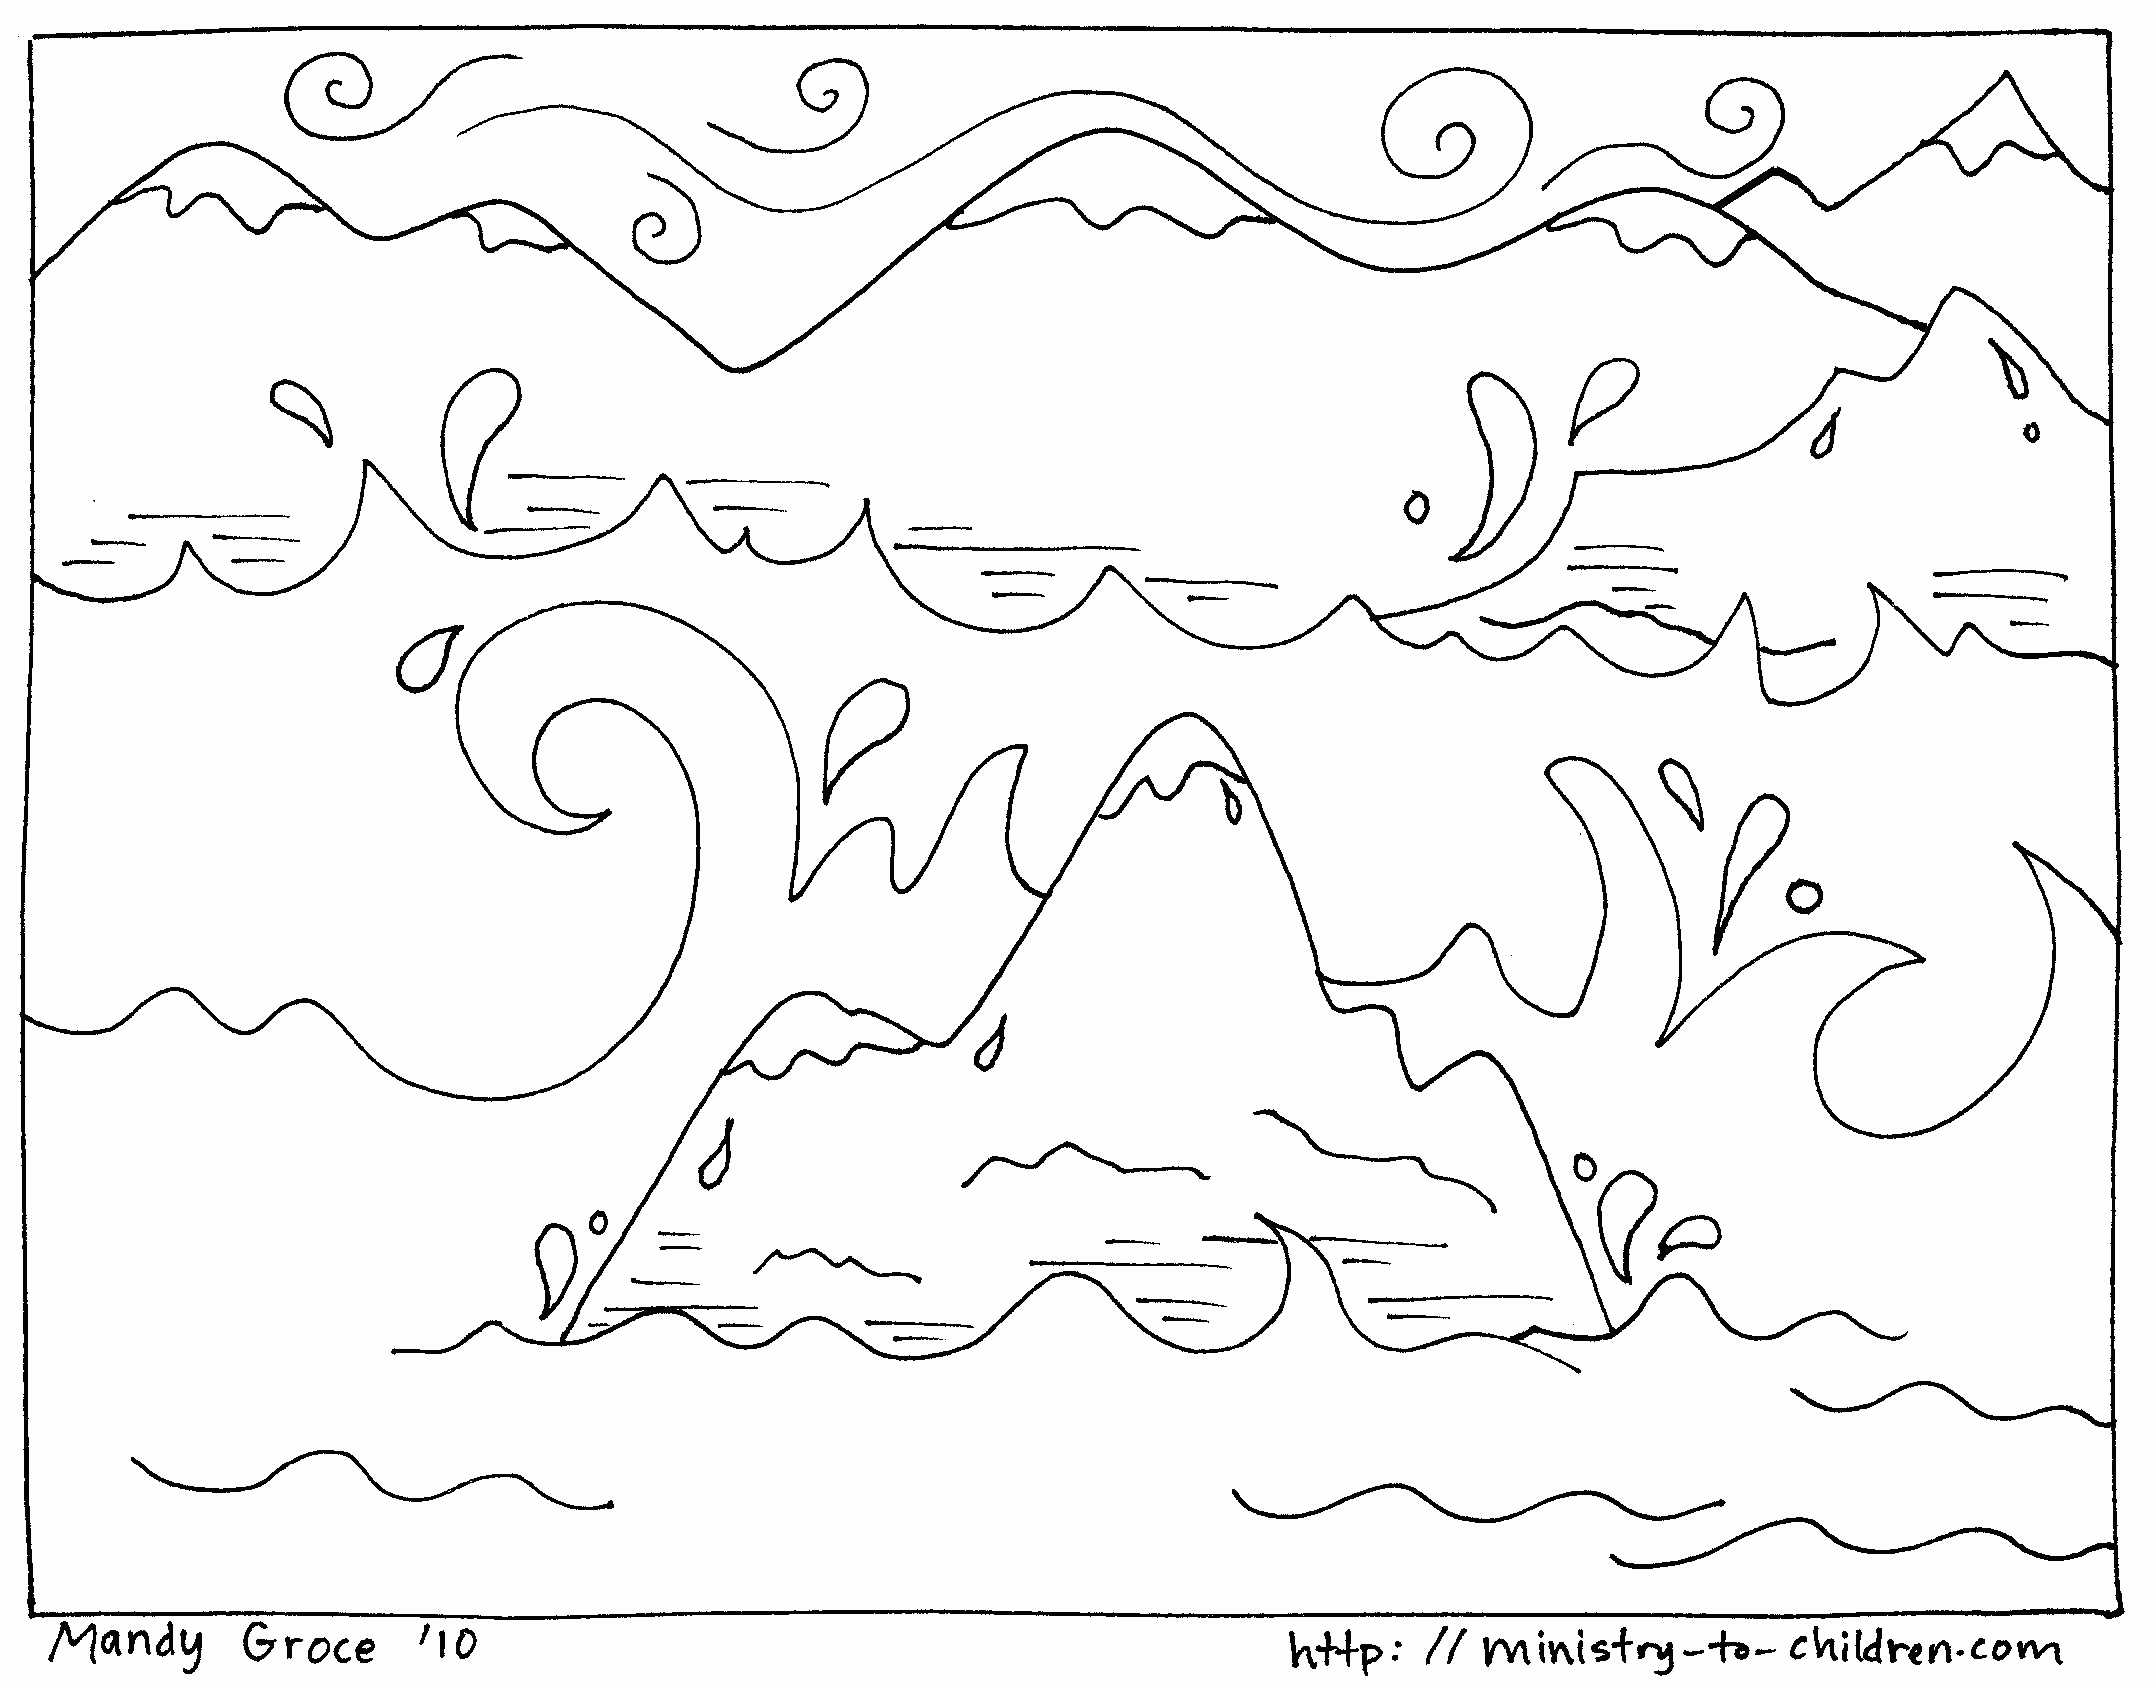 5th day of creation coloring page from creation story category ...